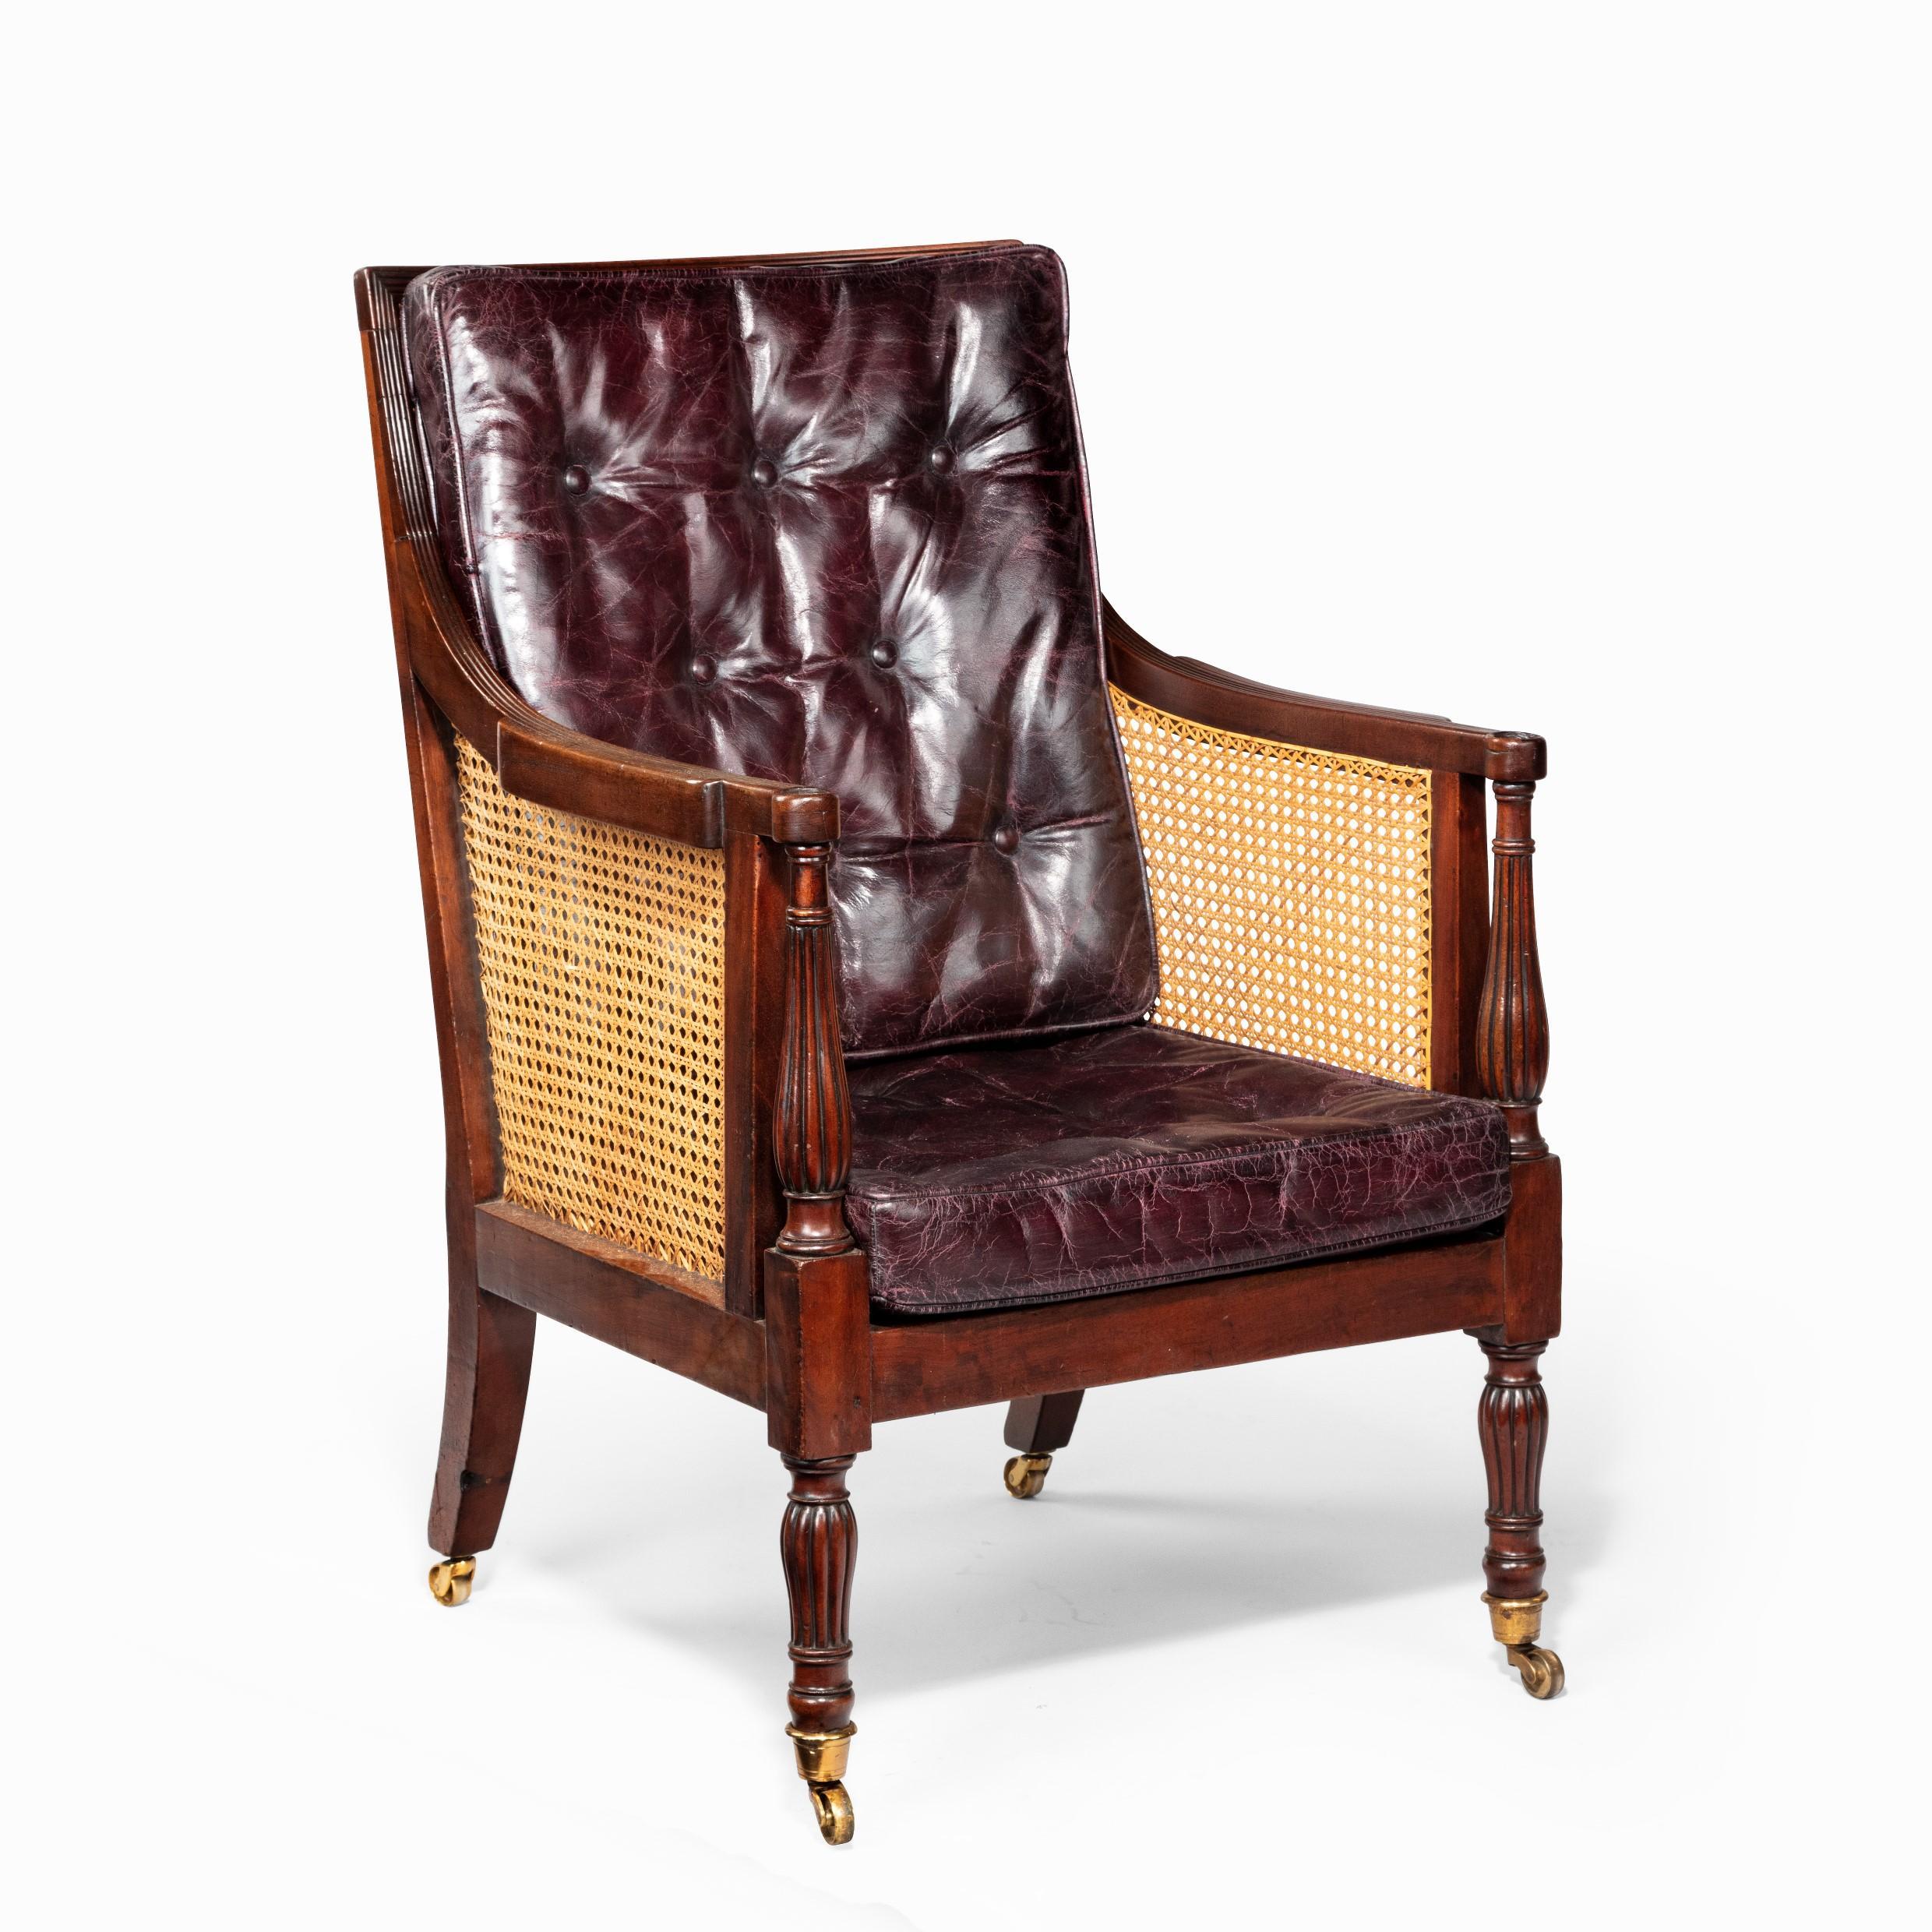 A Regency mahogany bergère chair, with a detachable drinks tray. Rectangular back and seat, the square section arms and seat rails raised on turned baluster front legs and out-swept back legs, re-upholstered in distressed buttoned burgundy leather,